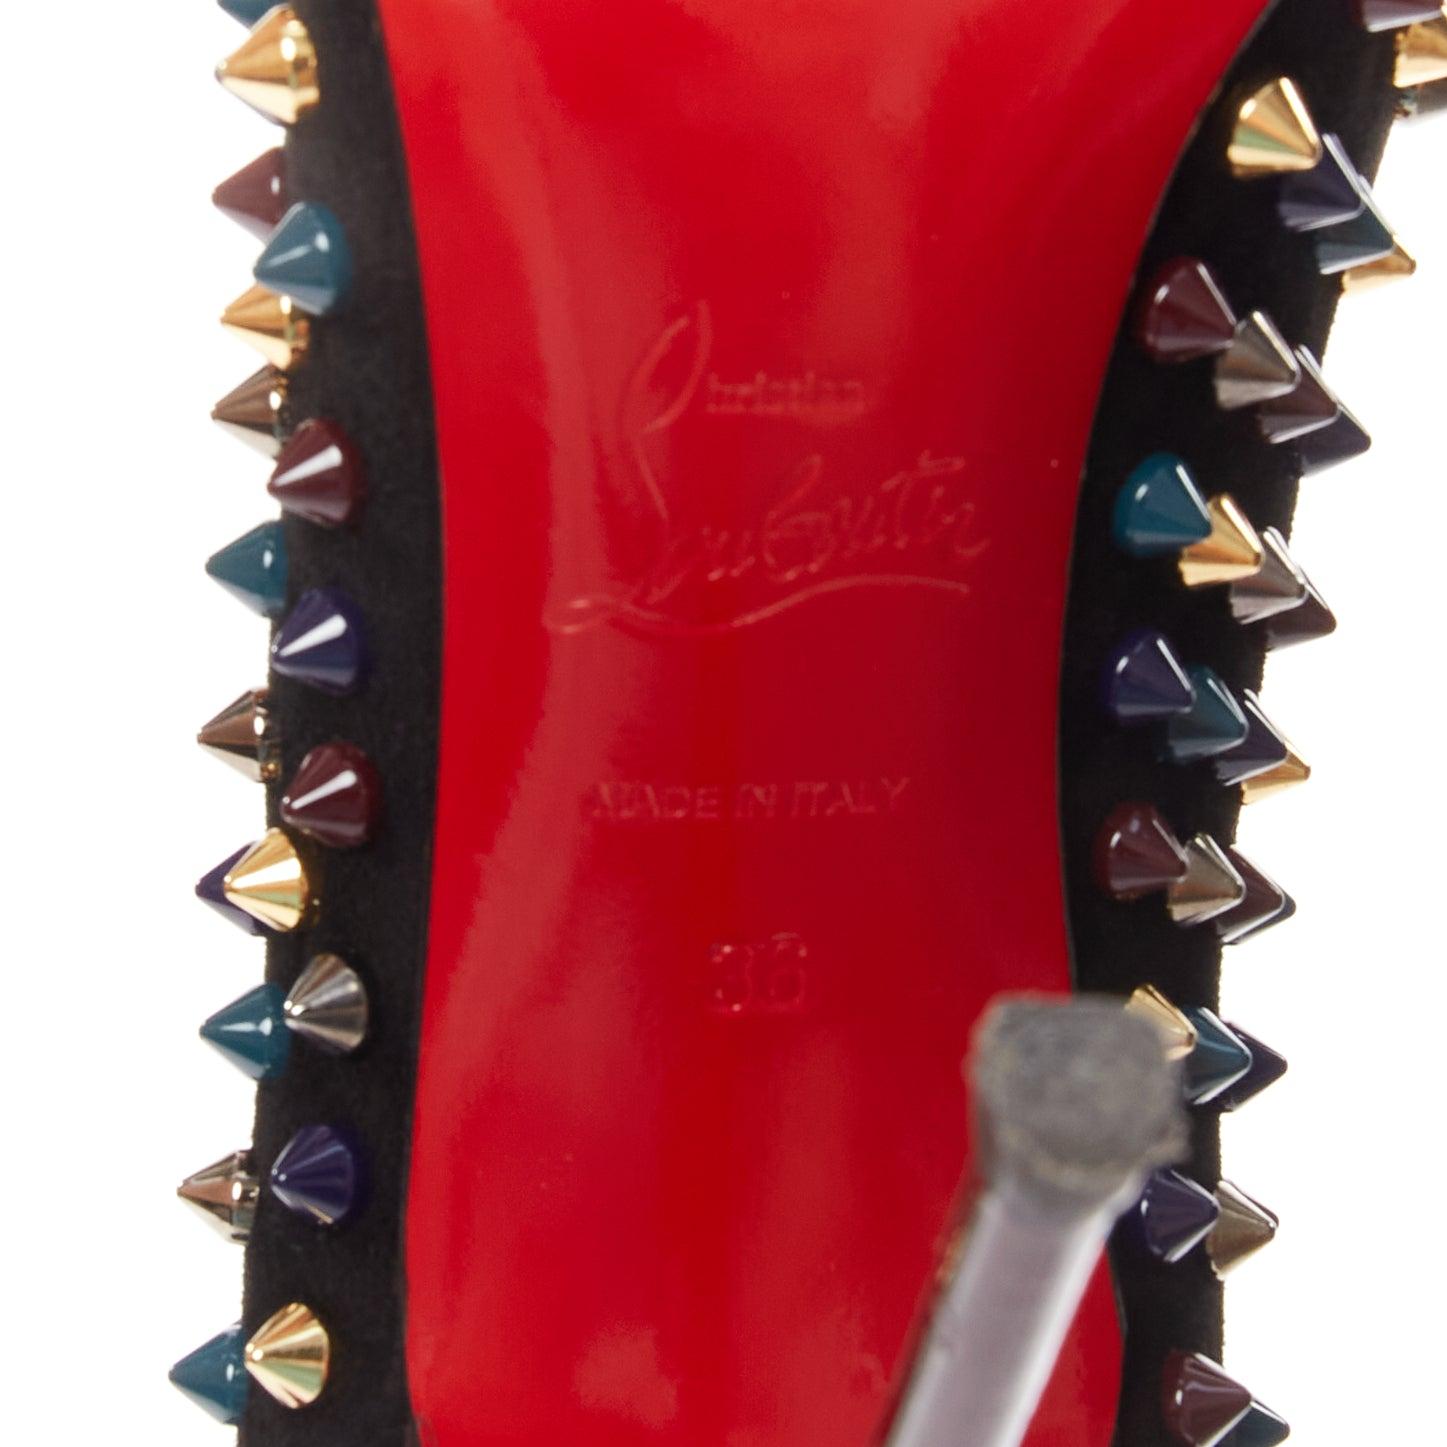 CHRISITAN LOUBOUTI Follies Spikes black suede jewely tone spike pigalle EU36 For Sale 6